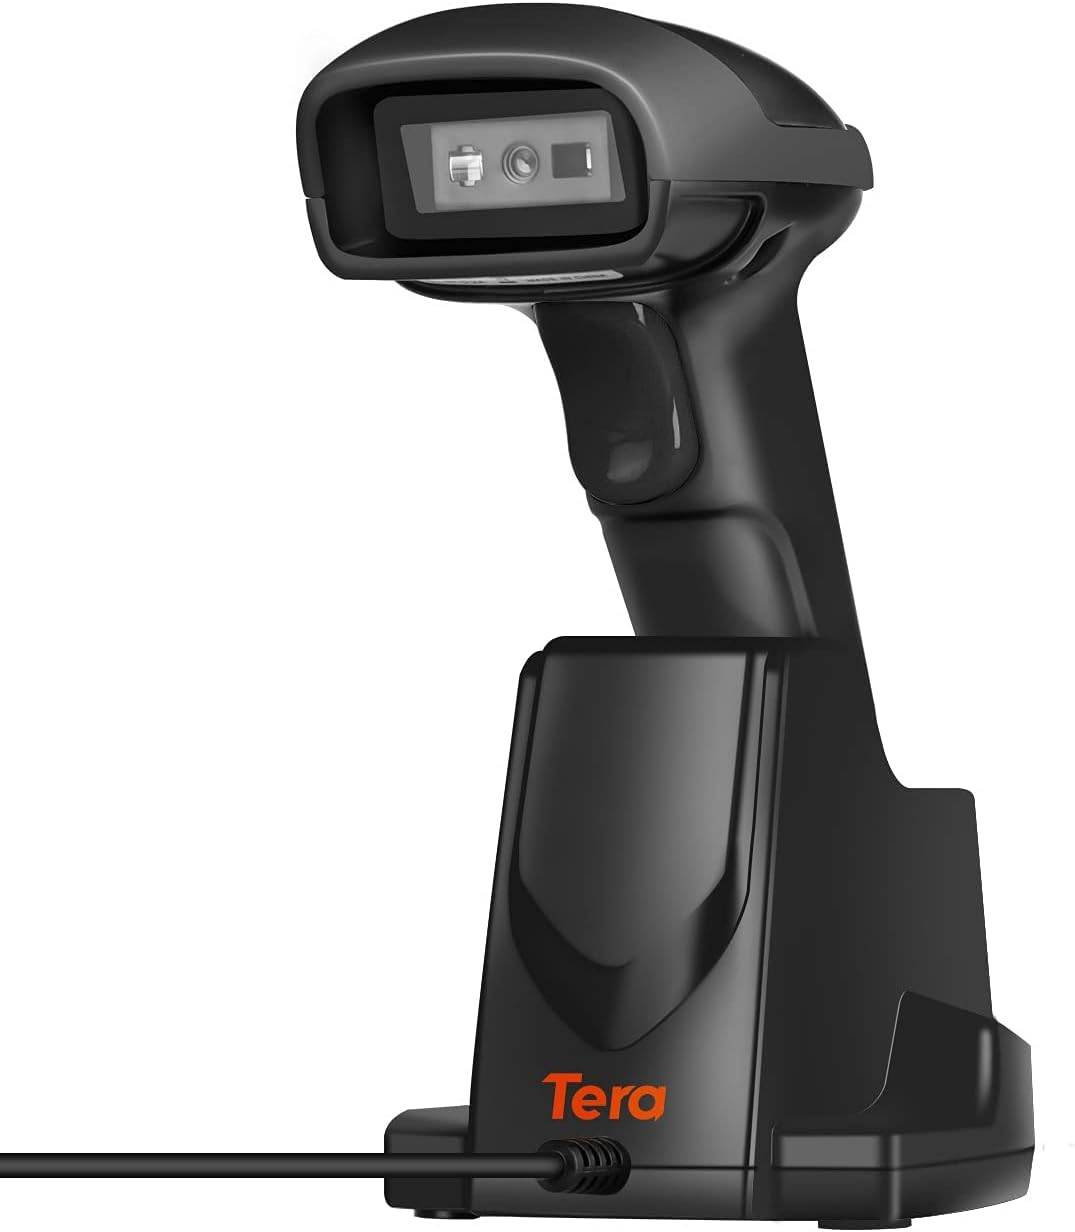 Tera Barcode Scanner 1D 2D QR Wireless, with USB Charging Cradle, 1D 2D QR Handheld Barcode Reader Plug and Play, D6100-4833